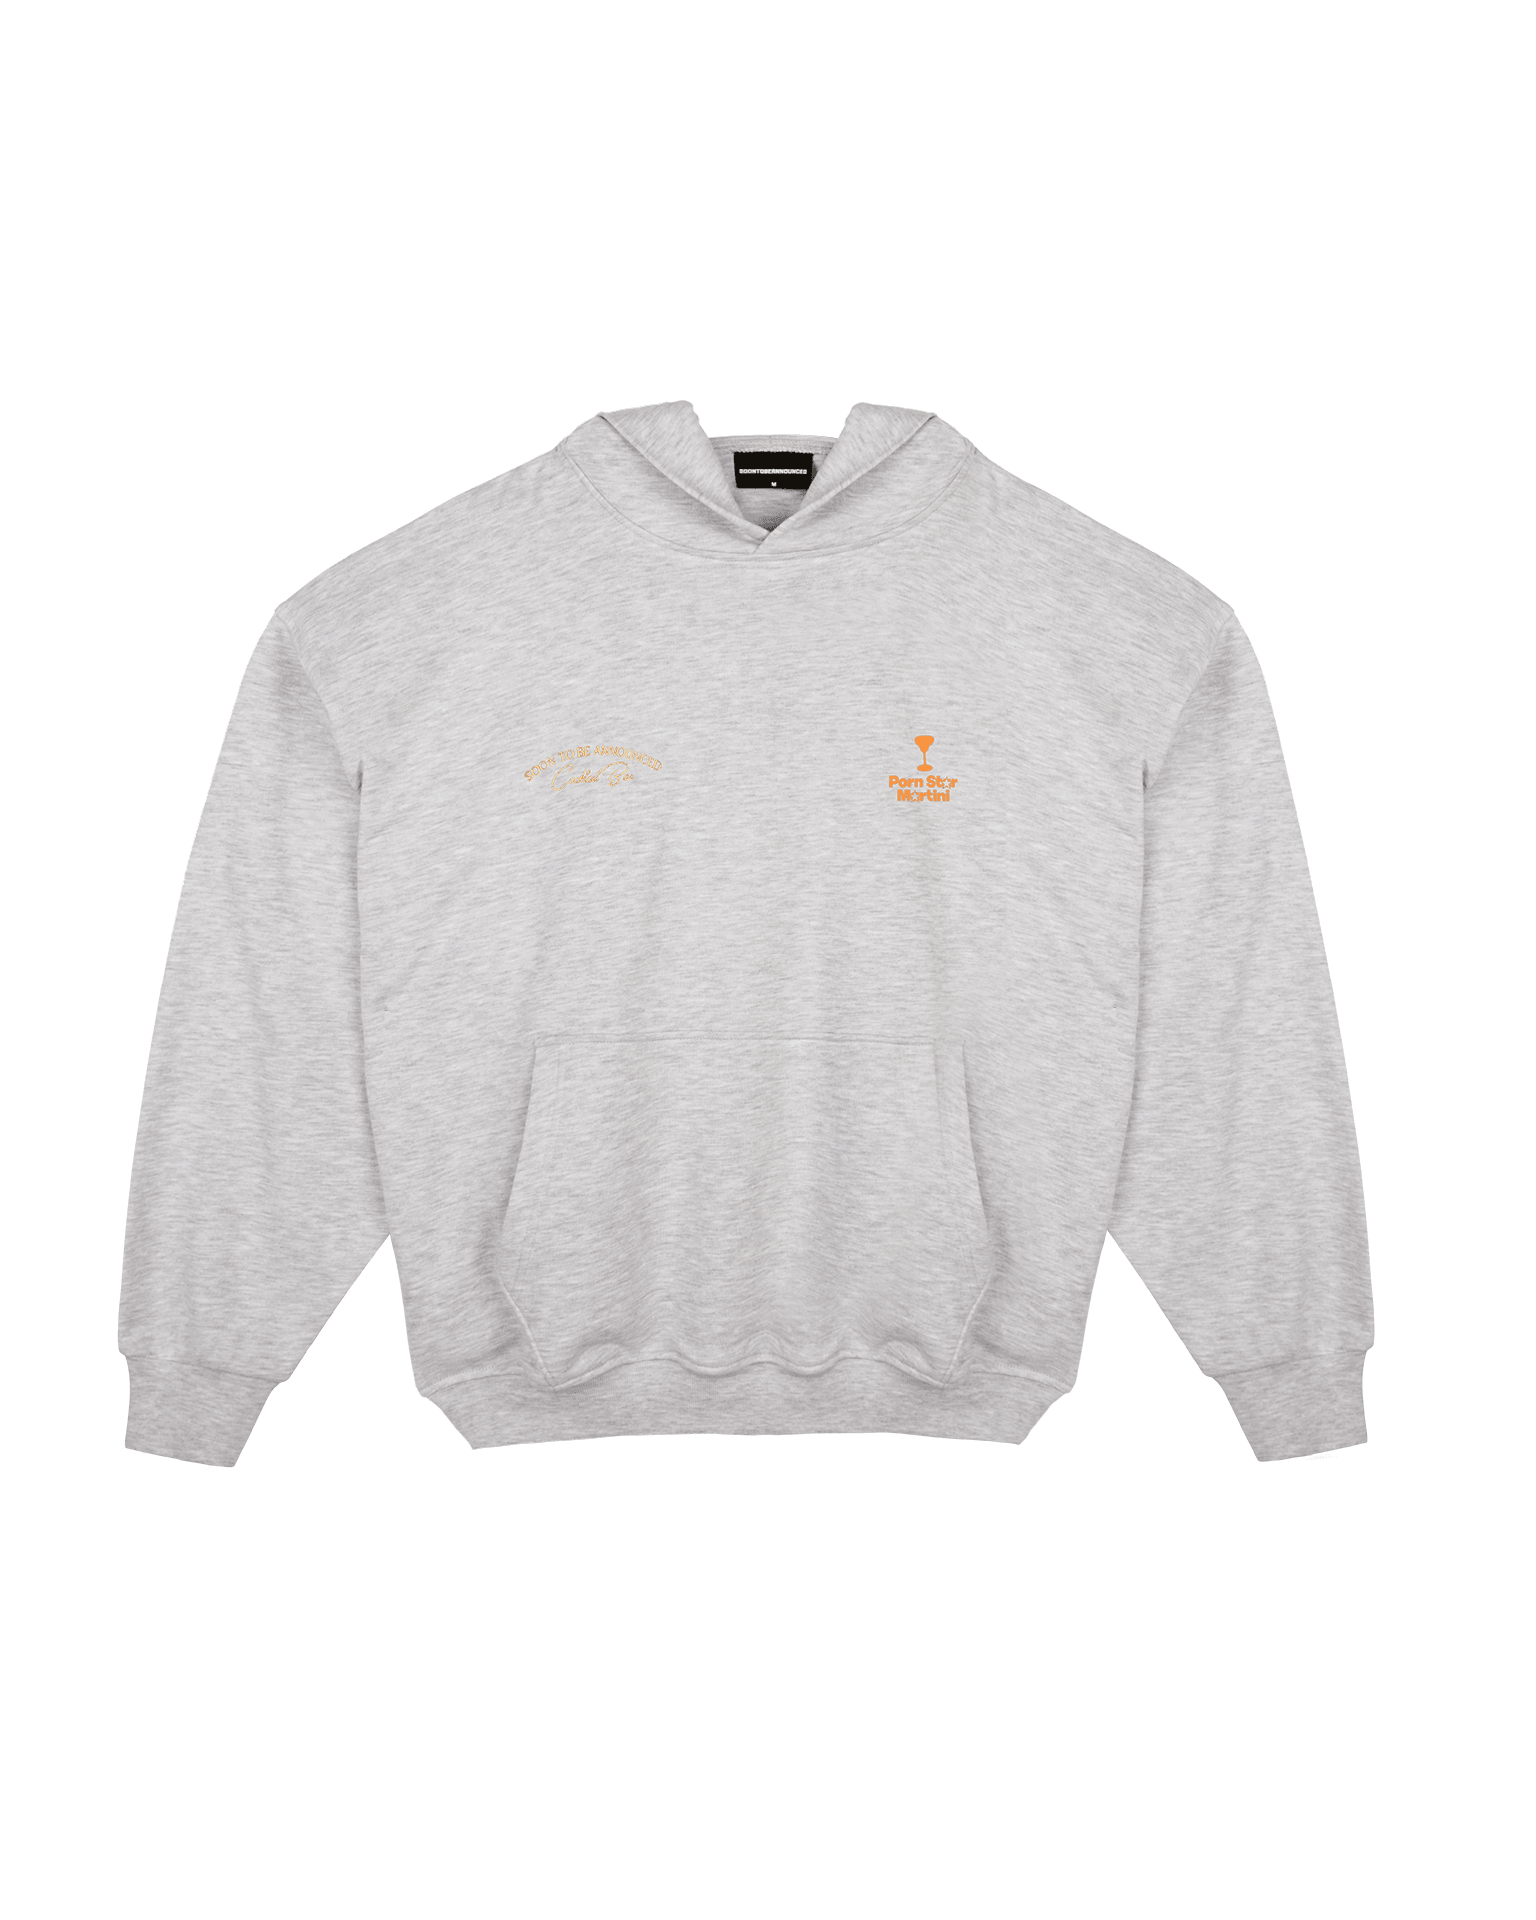 P✮rn Star Martini Hoodie - SOON TO BE ANNOUNCED